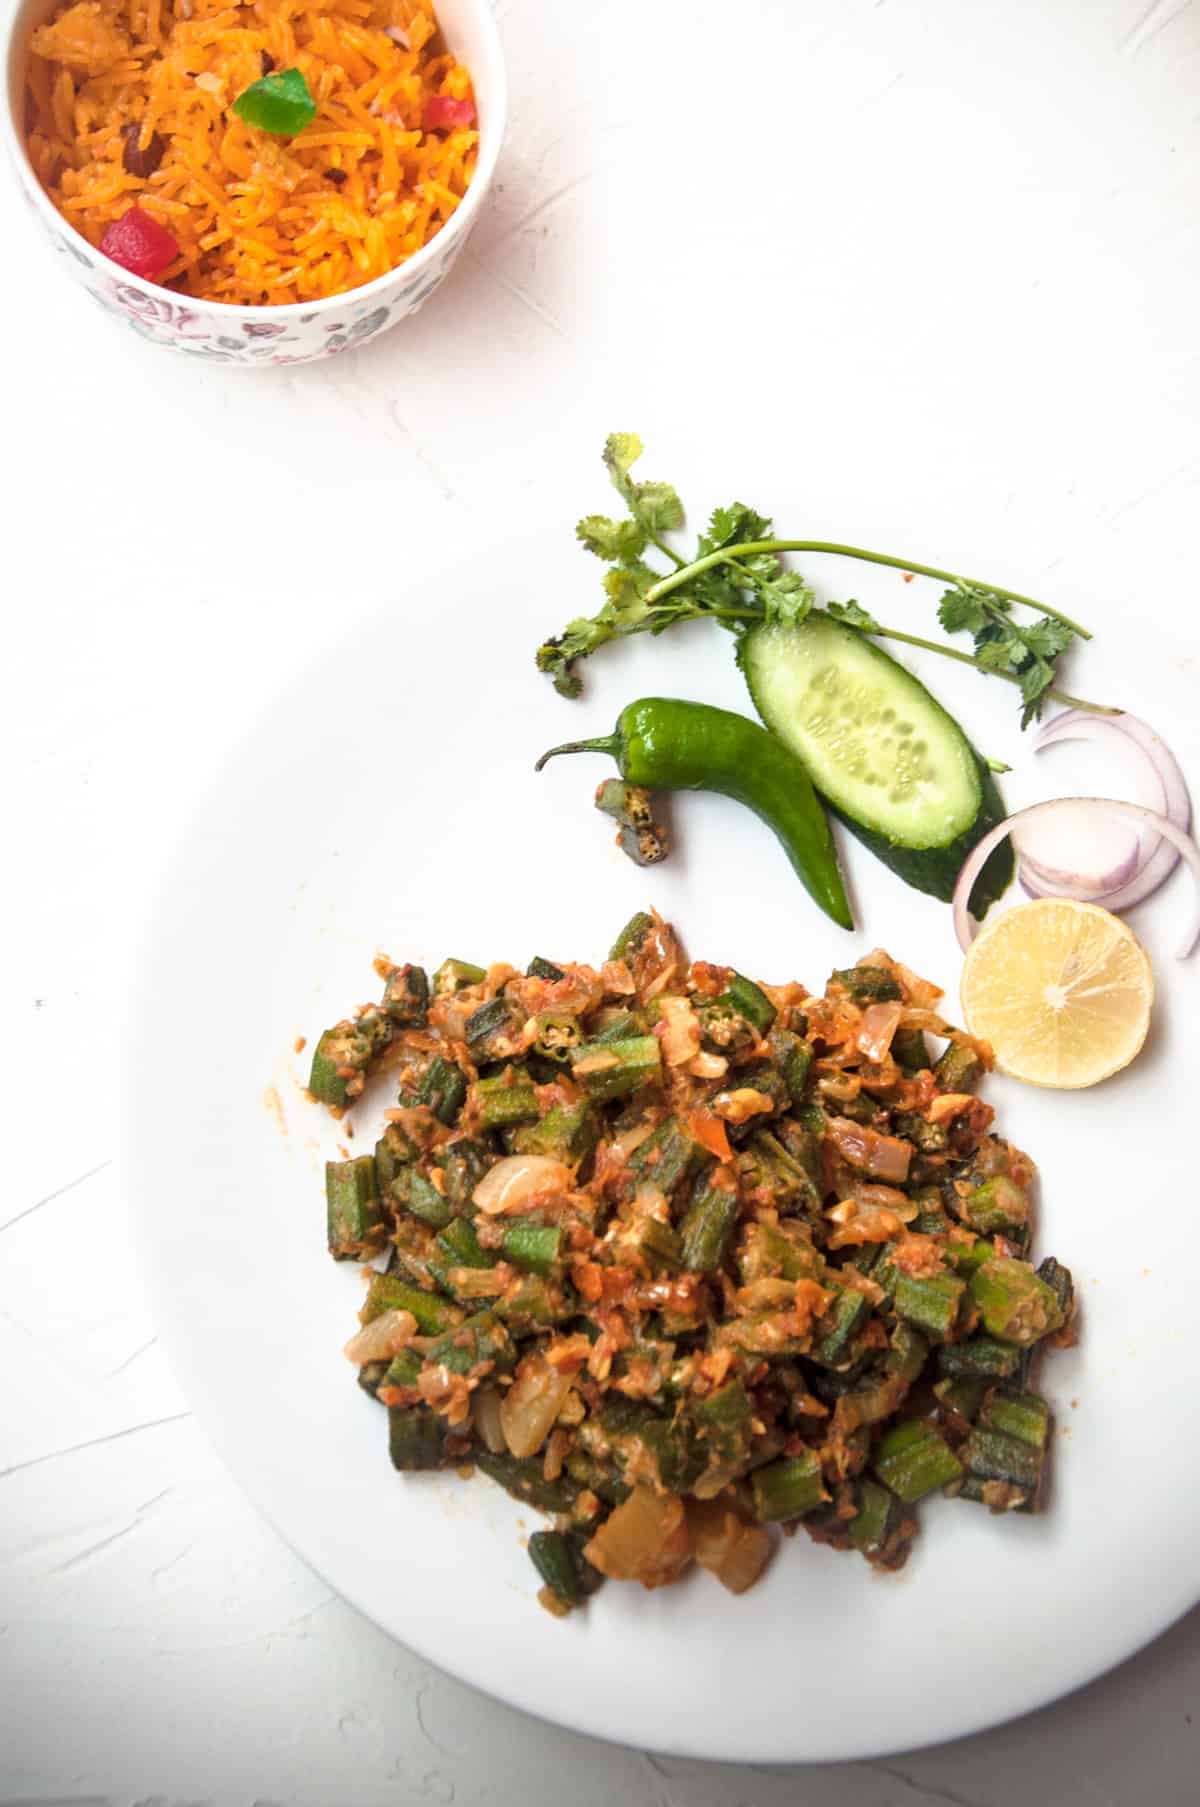 Bhindi masala served in a white plate with fresh sala and zarda in the background.